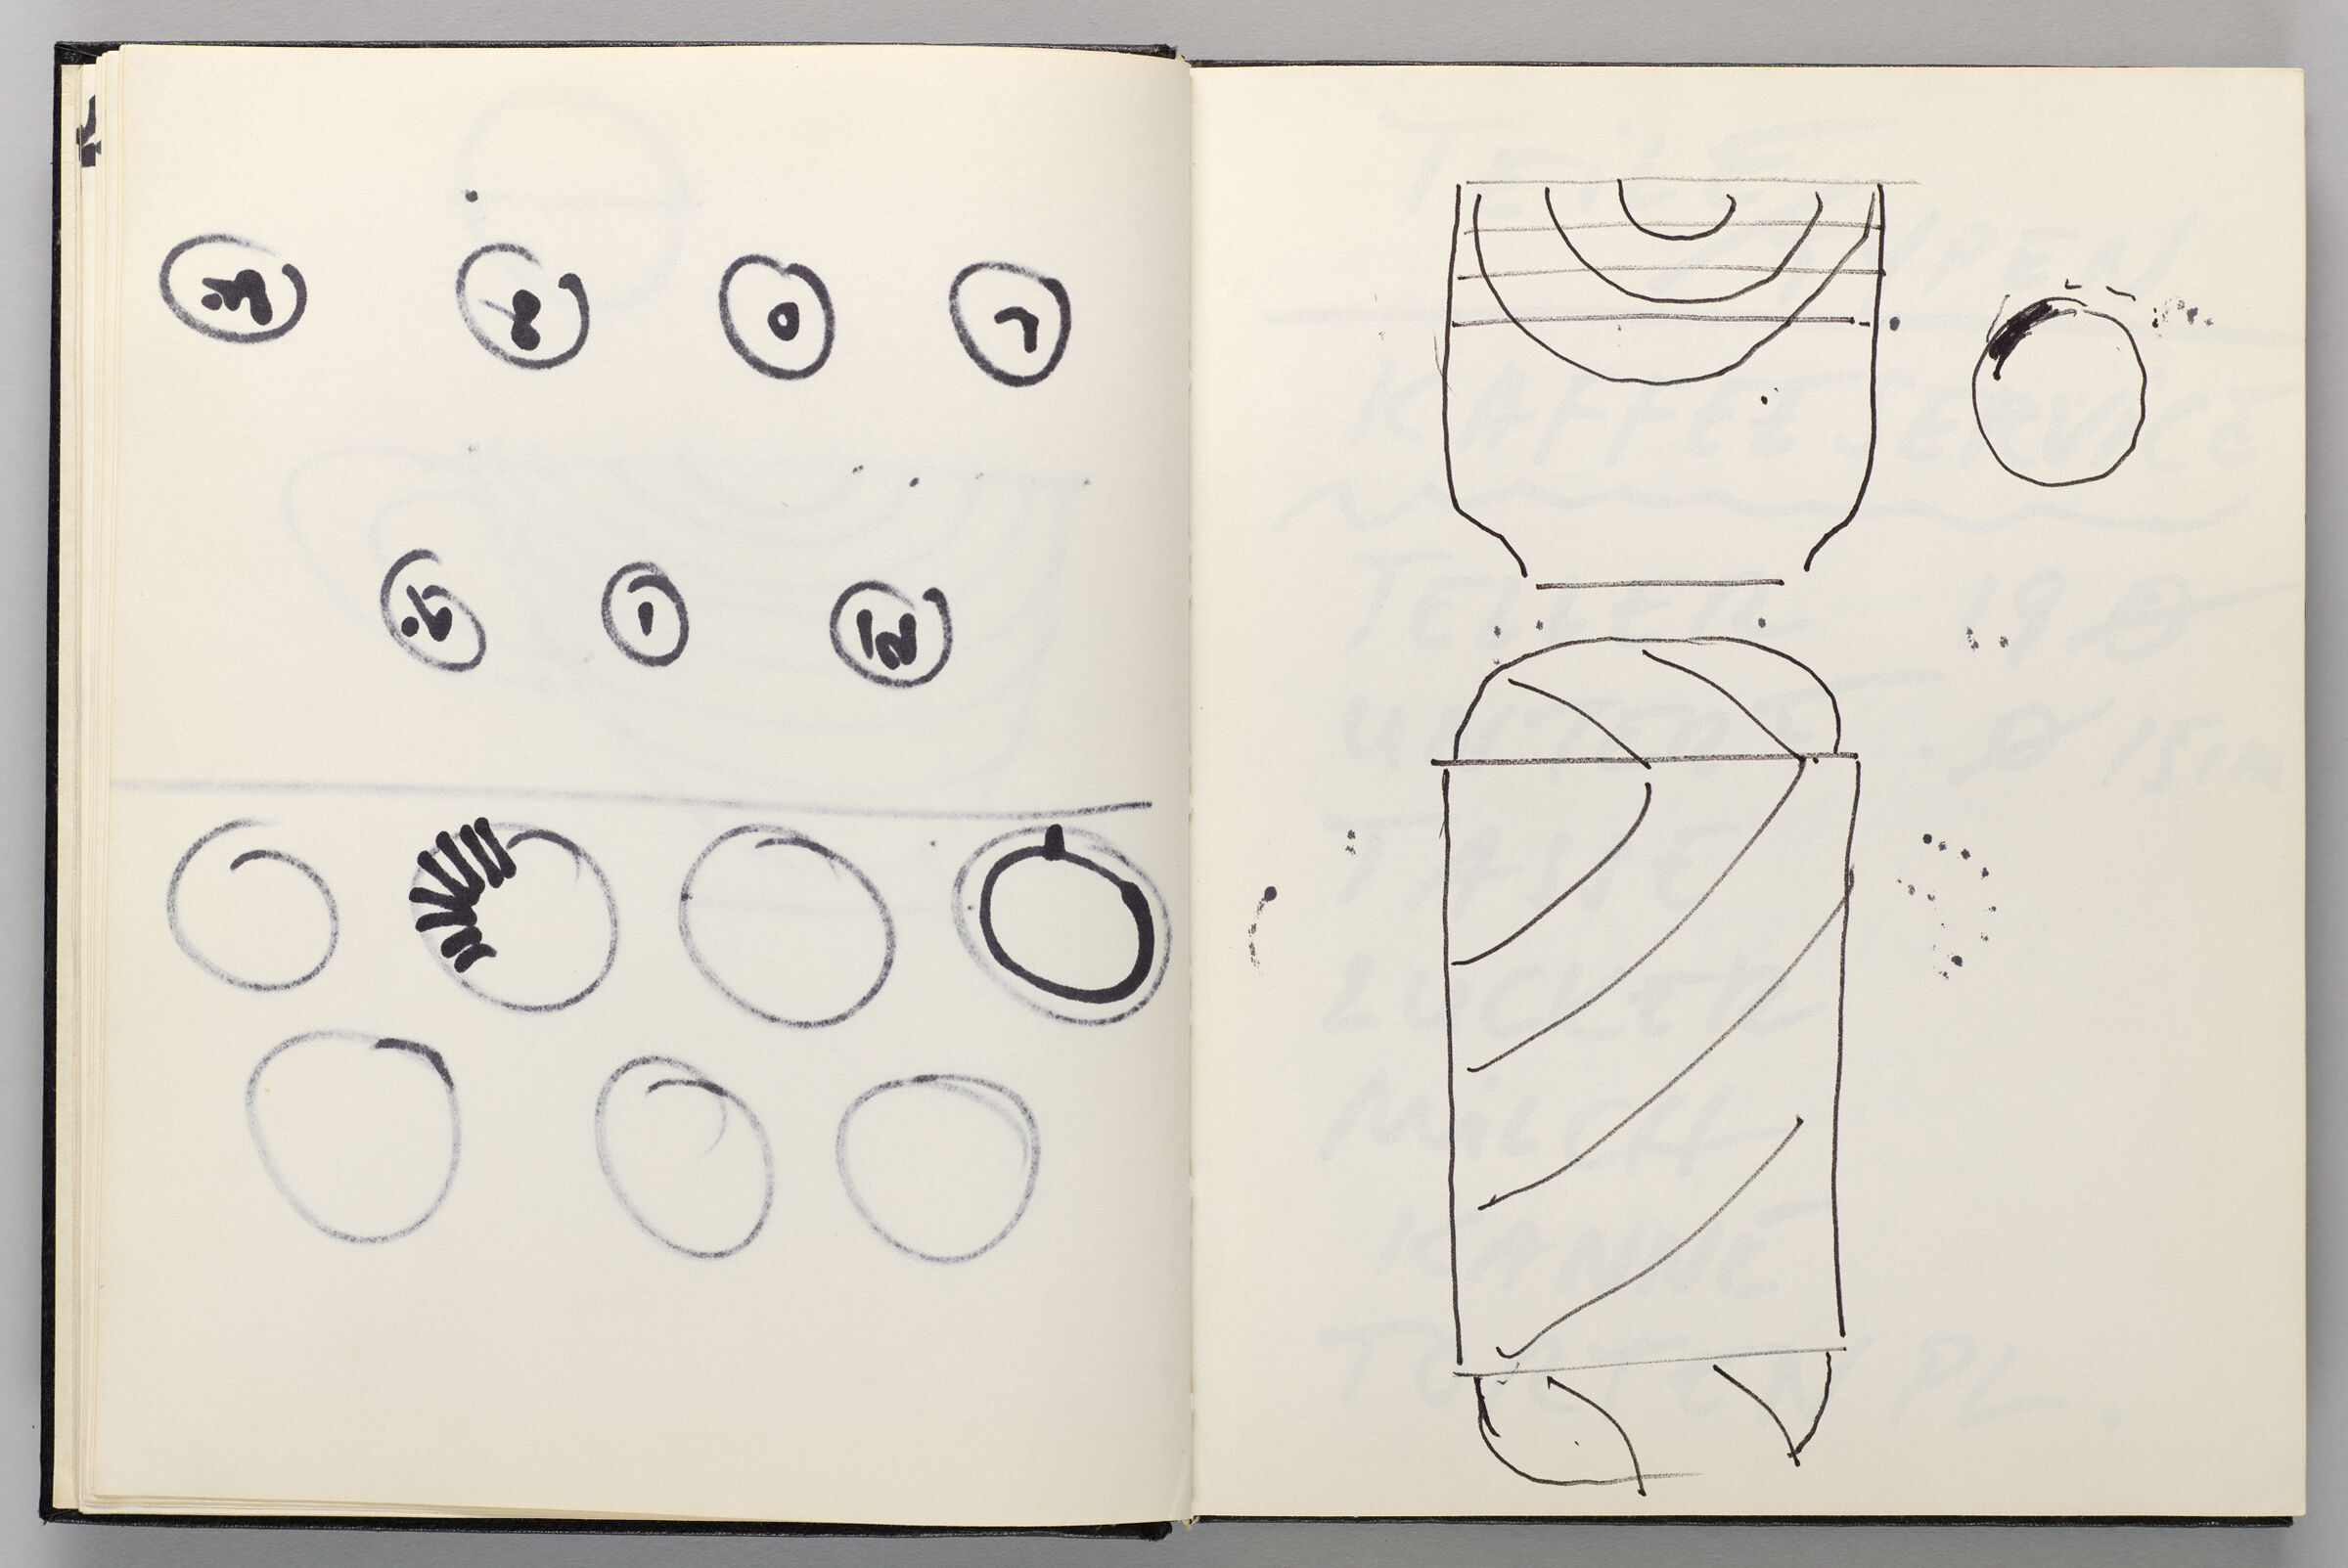 Untitled (Bleed-Through Of Previous Page, Left Page); Untitled (Ornamental Design For Porcelain Set, Right Page)